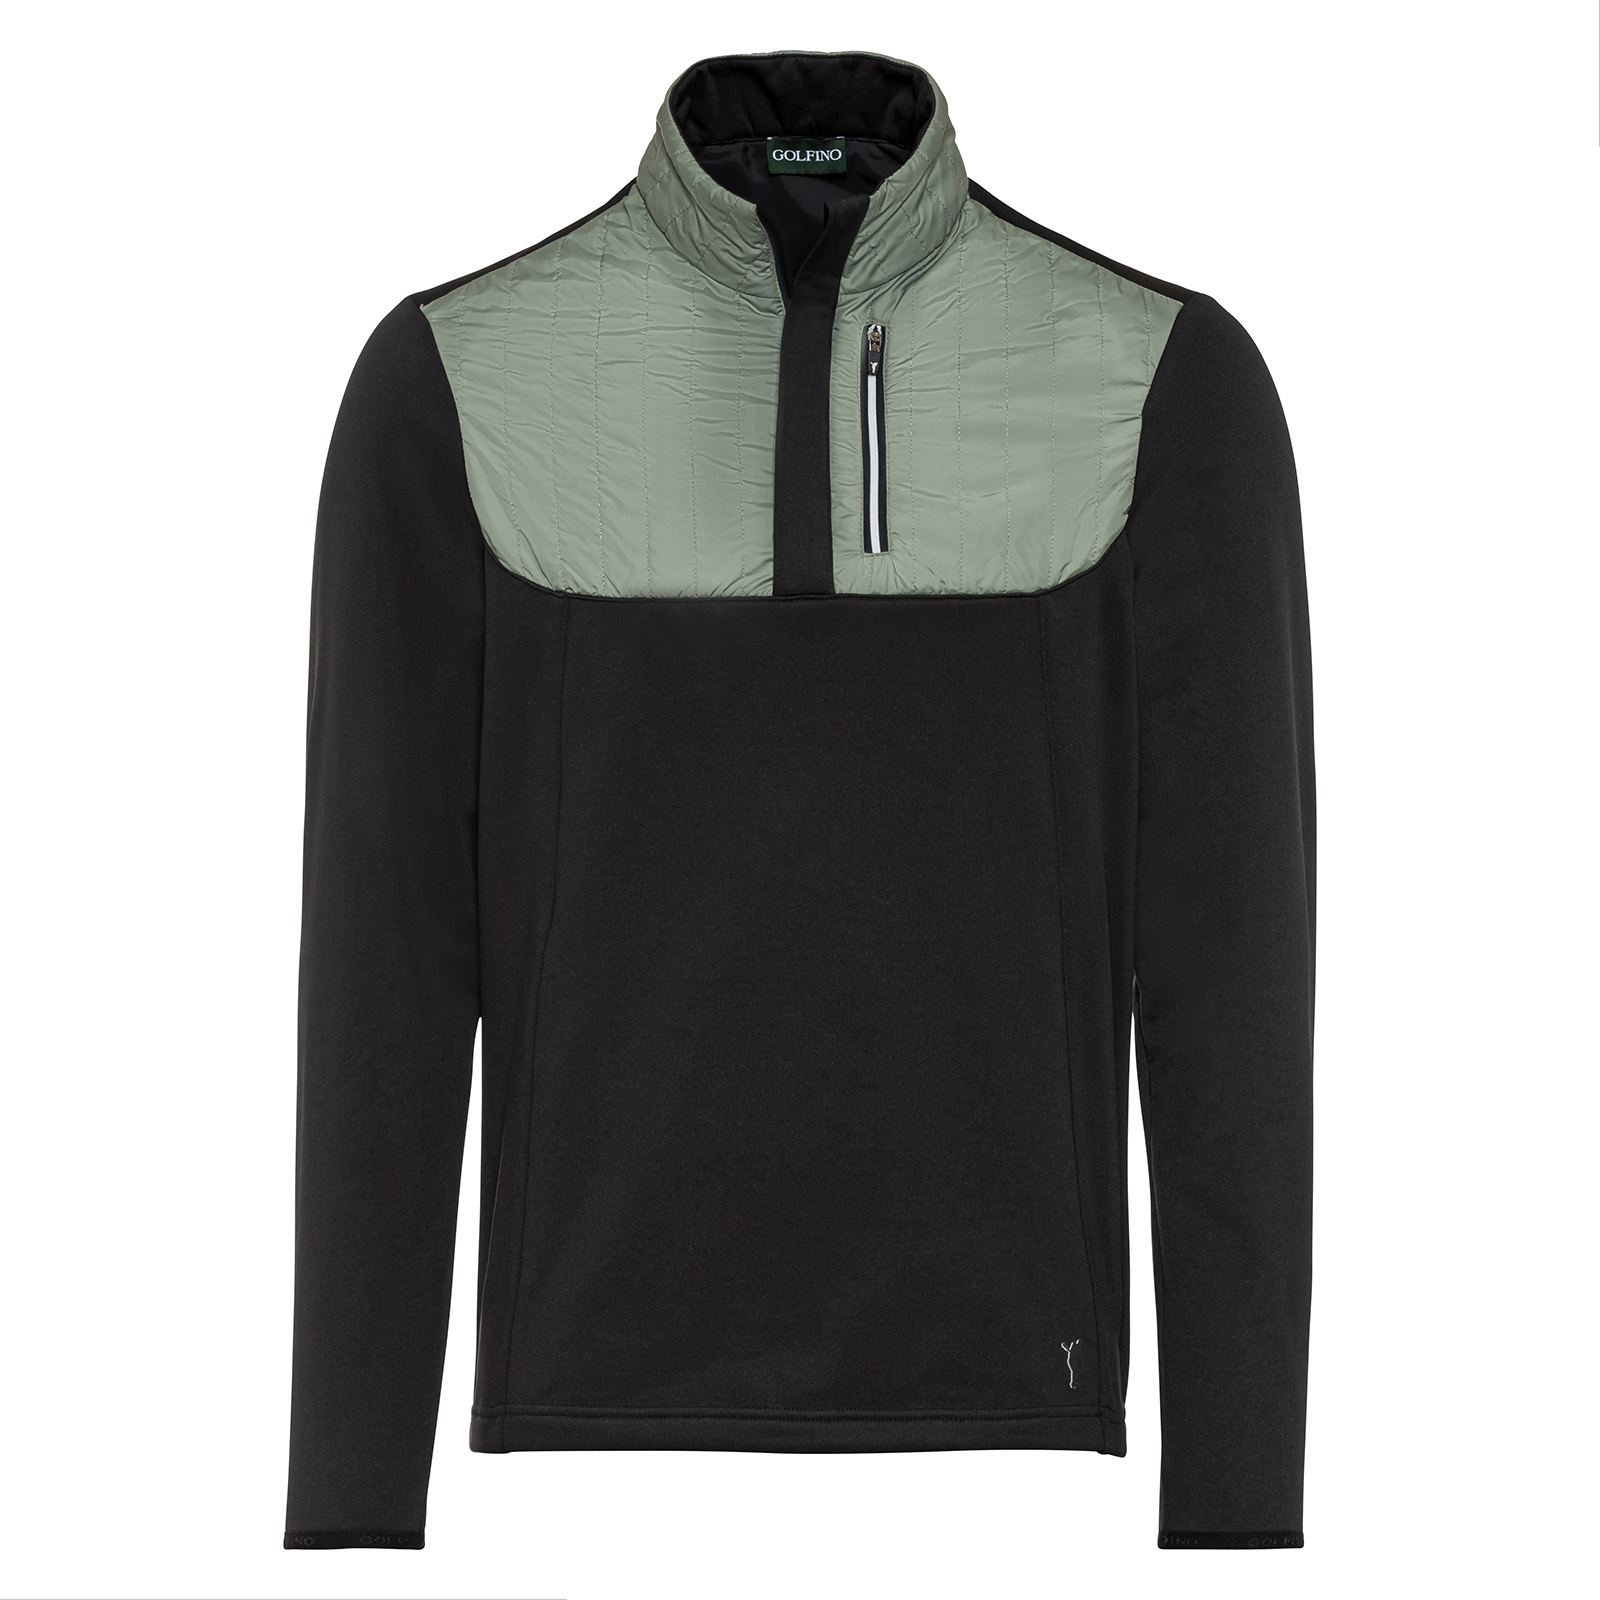 Men's troyer golf jacket with cold protection function